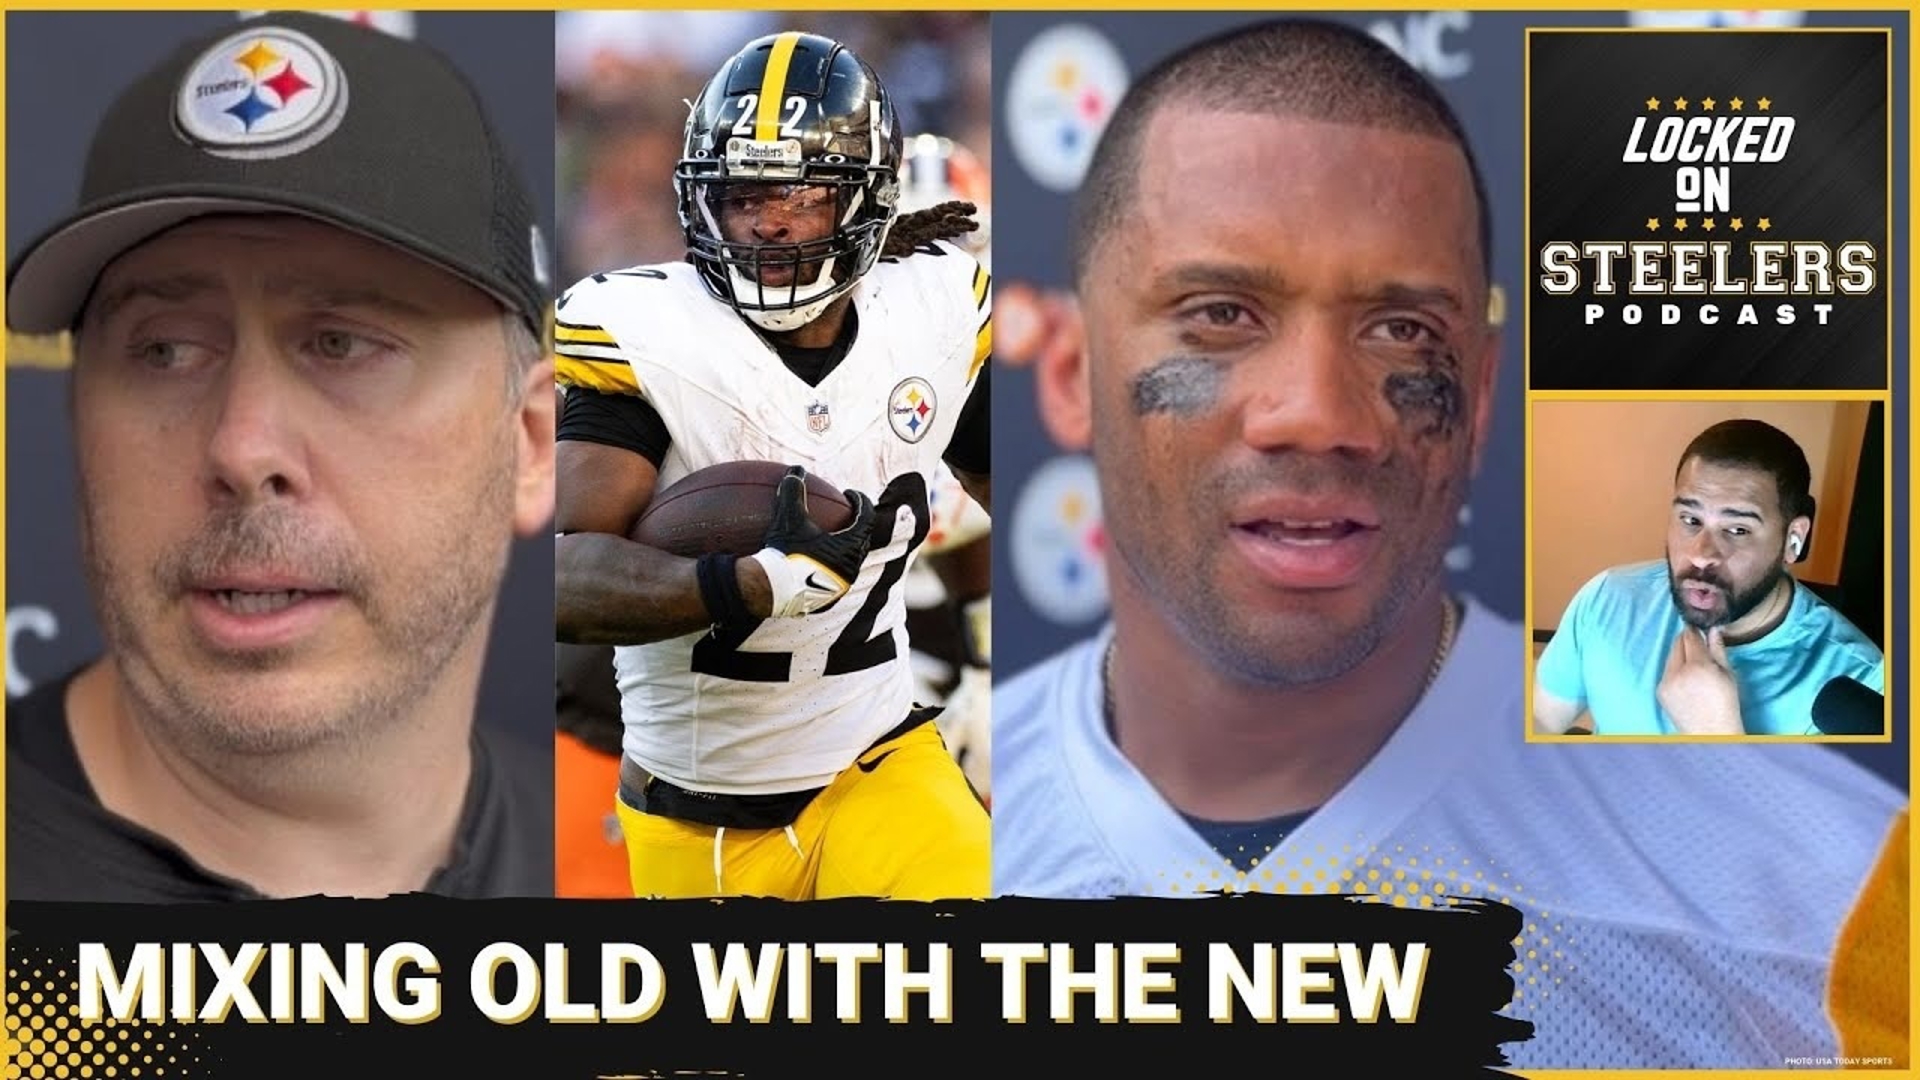 The Pittsburgh Steelers' offense needs Arthur Smith to blend both the old and new players to make the team's new offense.